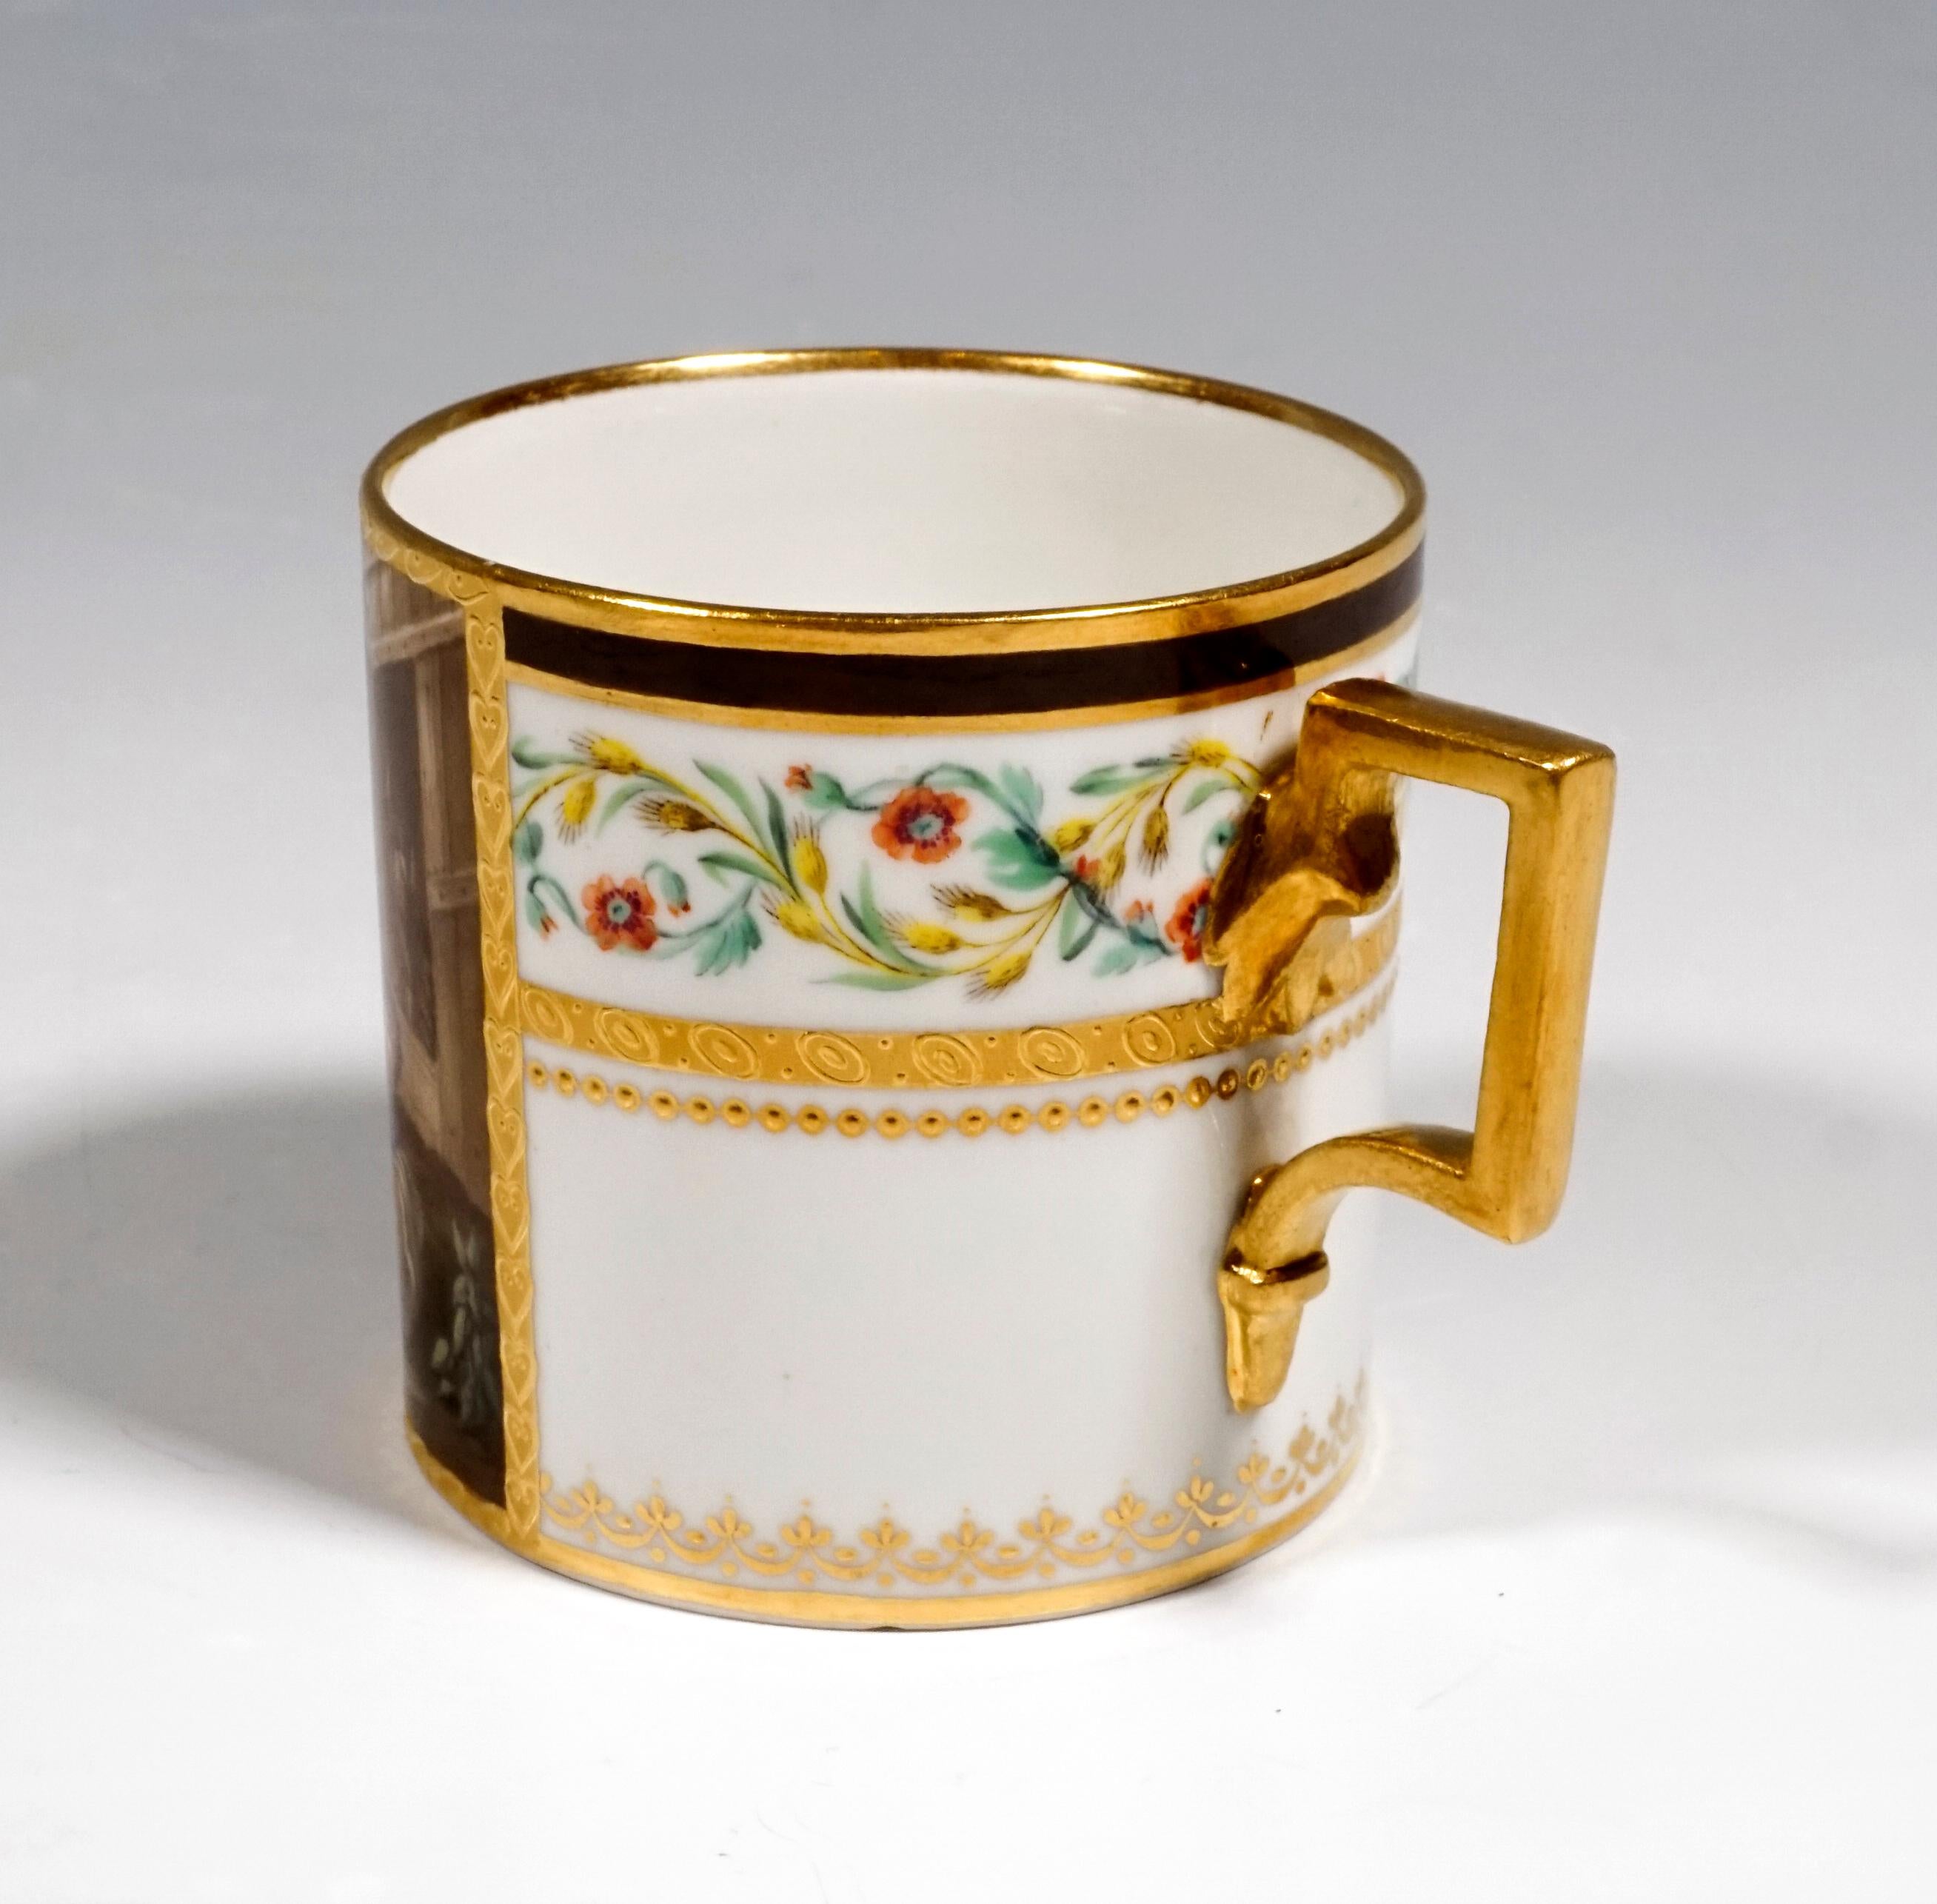 Hand-Crafted Viennese Imperial Porcelain Collecting Cup with Genre Scene, Sorgenthal, 1801